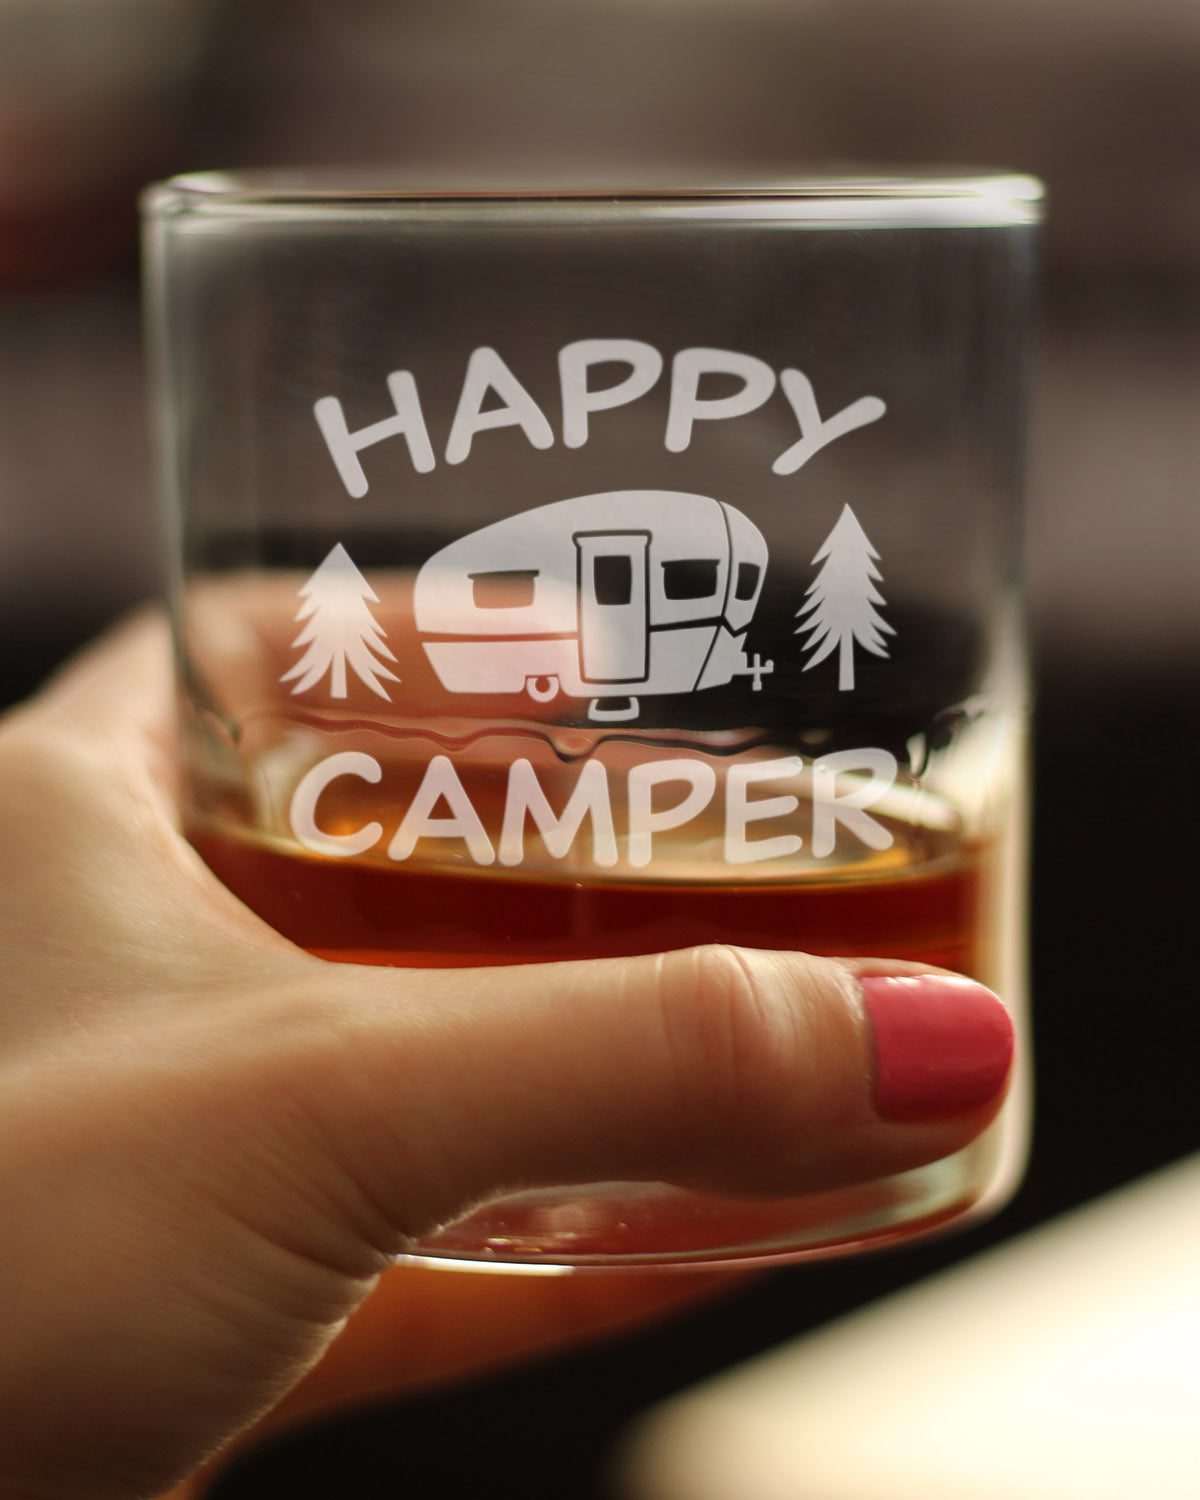 Happy Camper - Whiskey Rocks Glass - Fun RV Gifts for Men &amp; Women Who Love Drinking Whisky &amp; Camping Decor - 10.25 oz